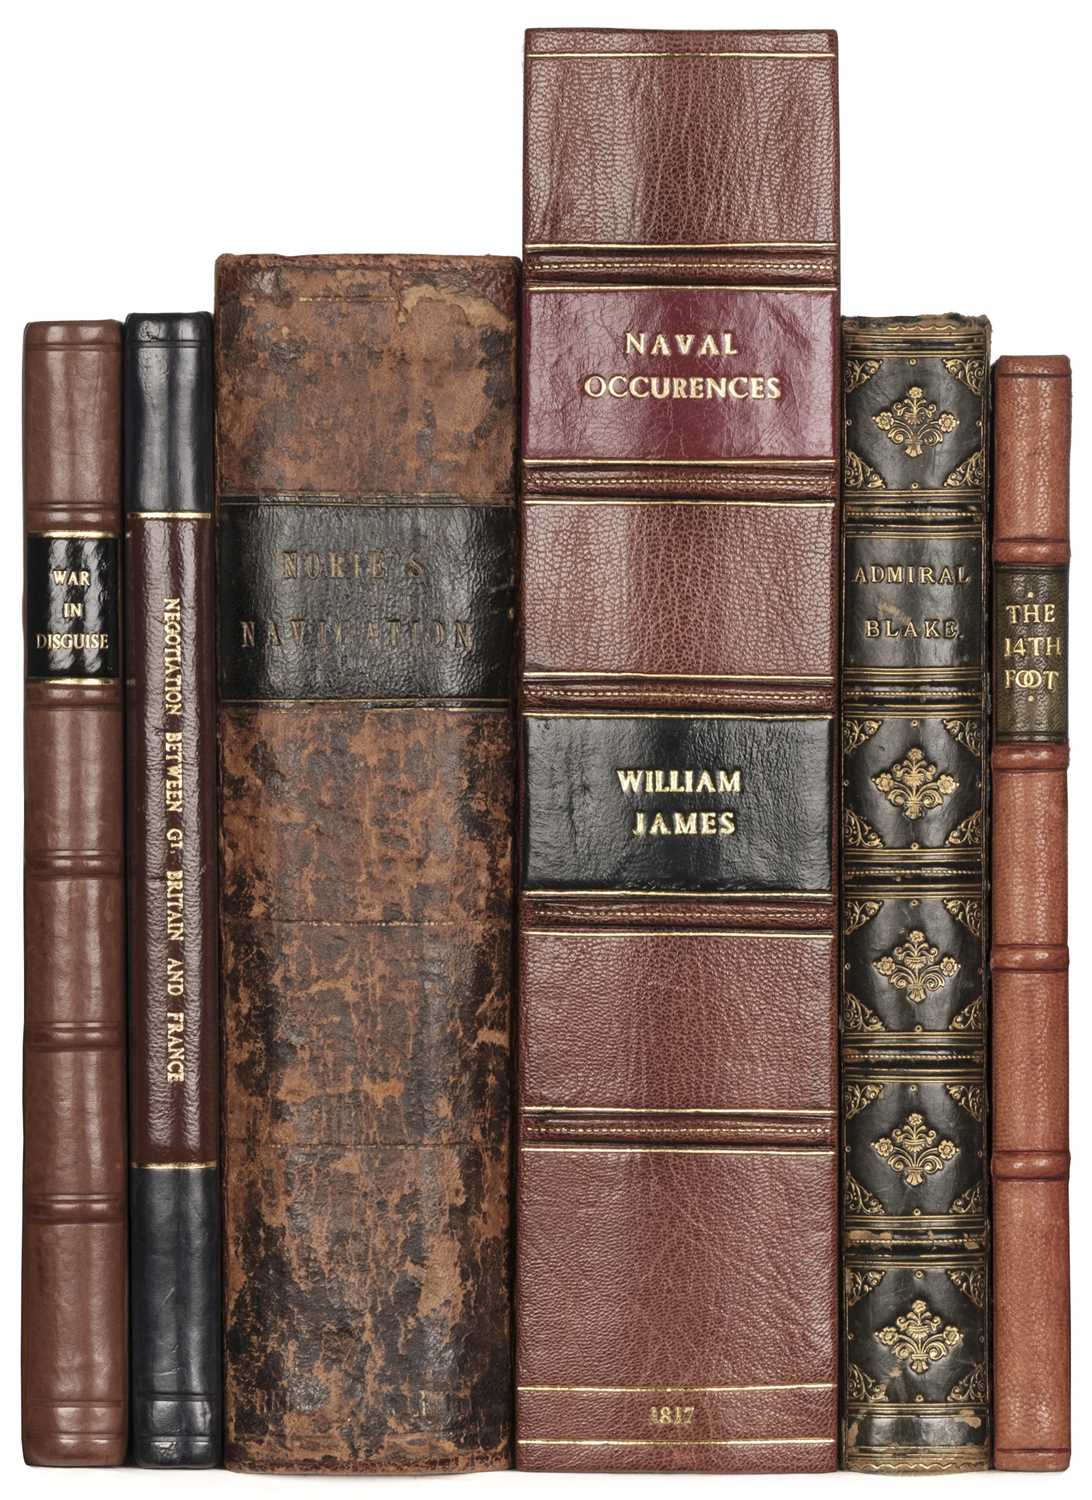 Lot 22 - Stephen (James). War in Disguise, 1st edition, 1805, & 4 others